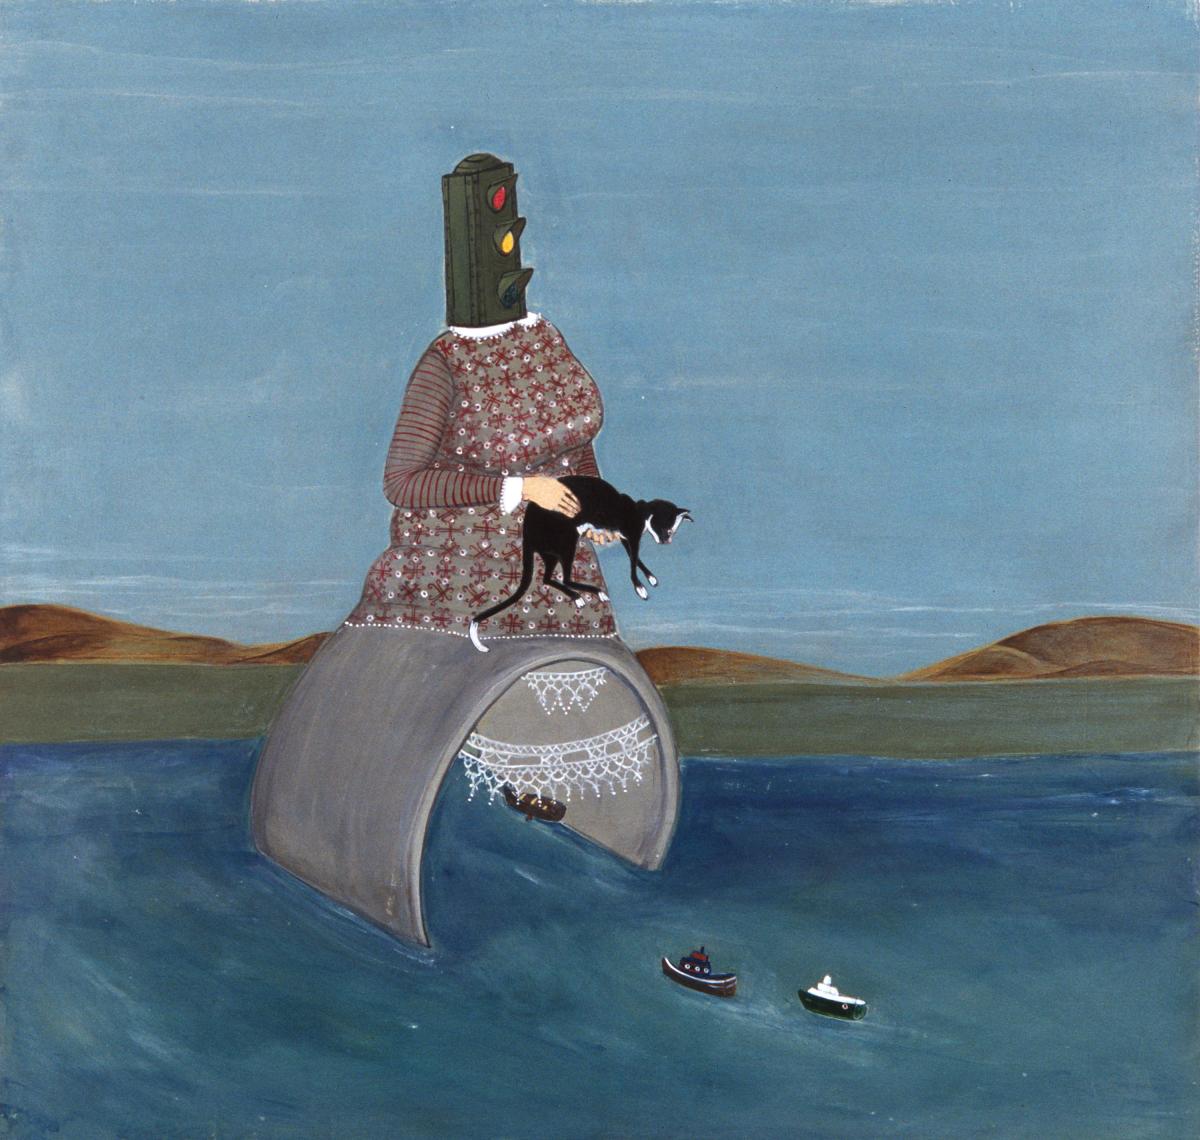 Painting of a figure with a stoplight as a head and holding a cat while floating on water